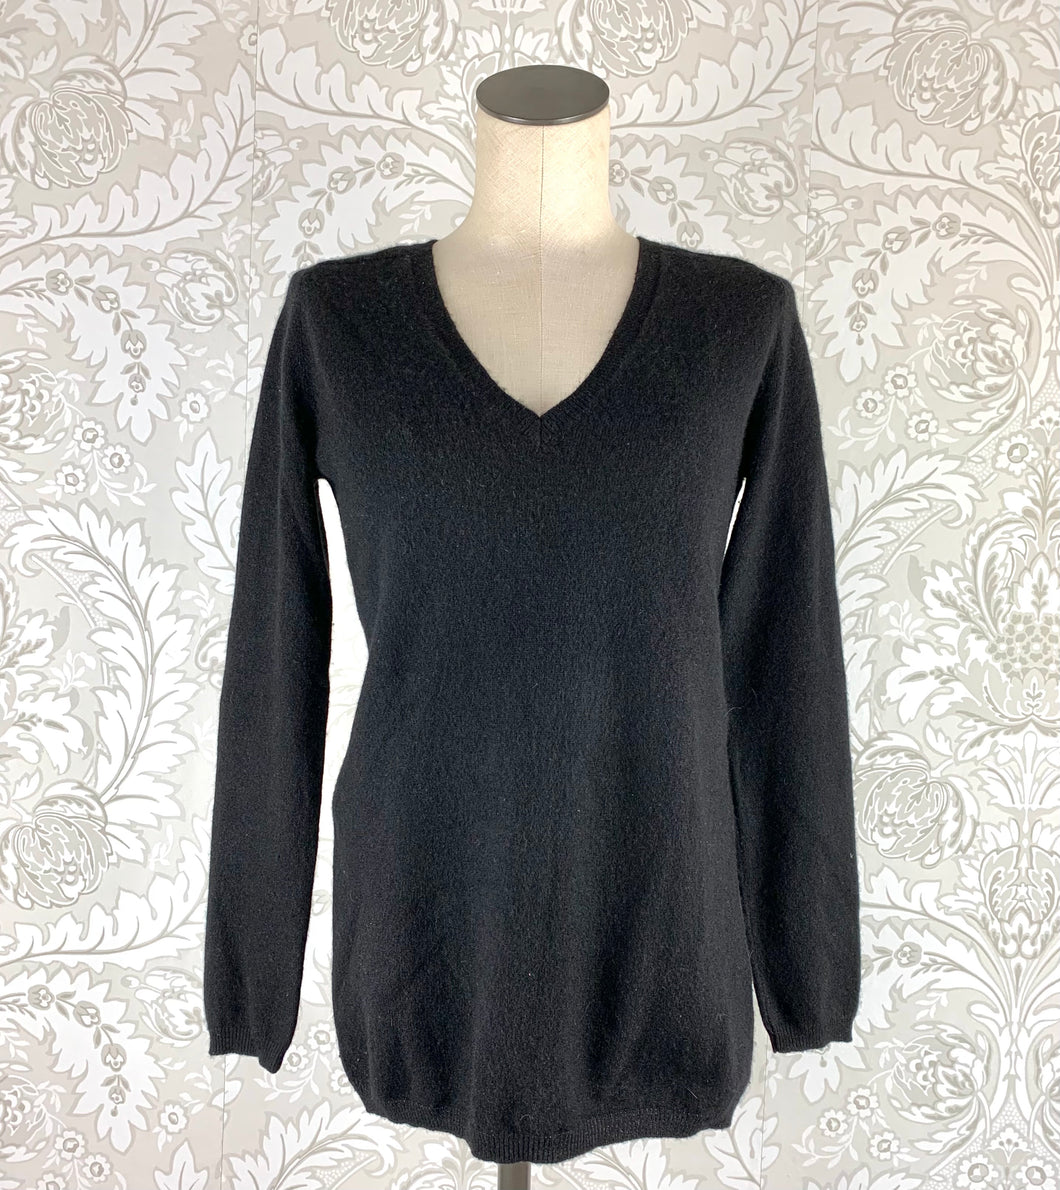 Ctwo1 Cashmere V-neck Sweater size S